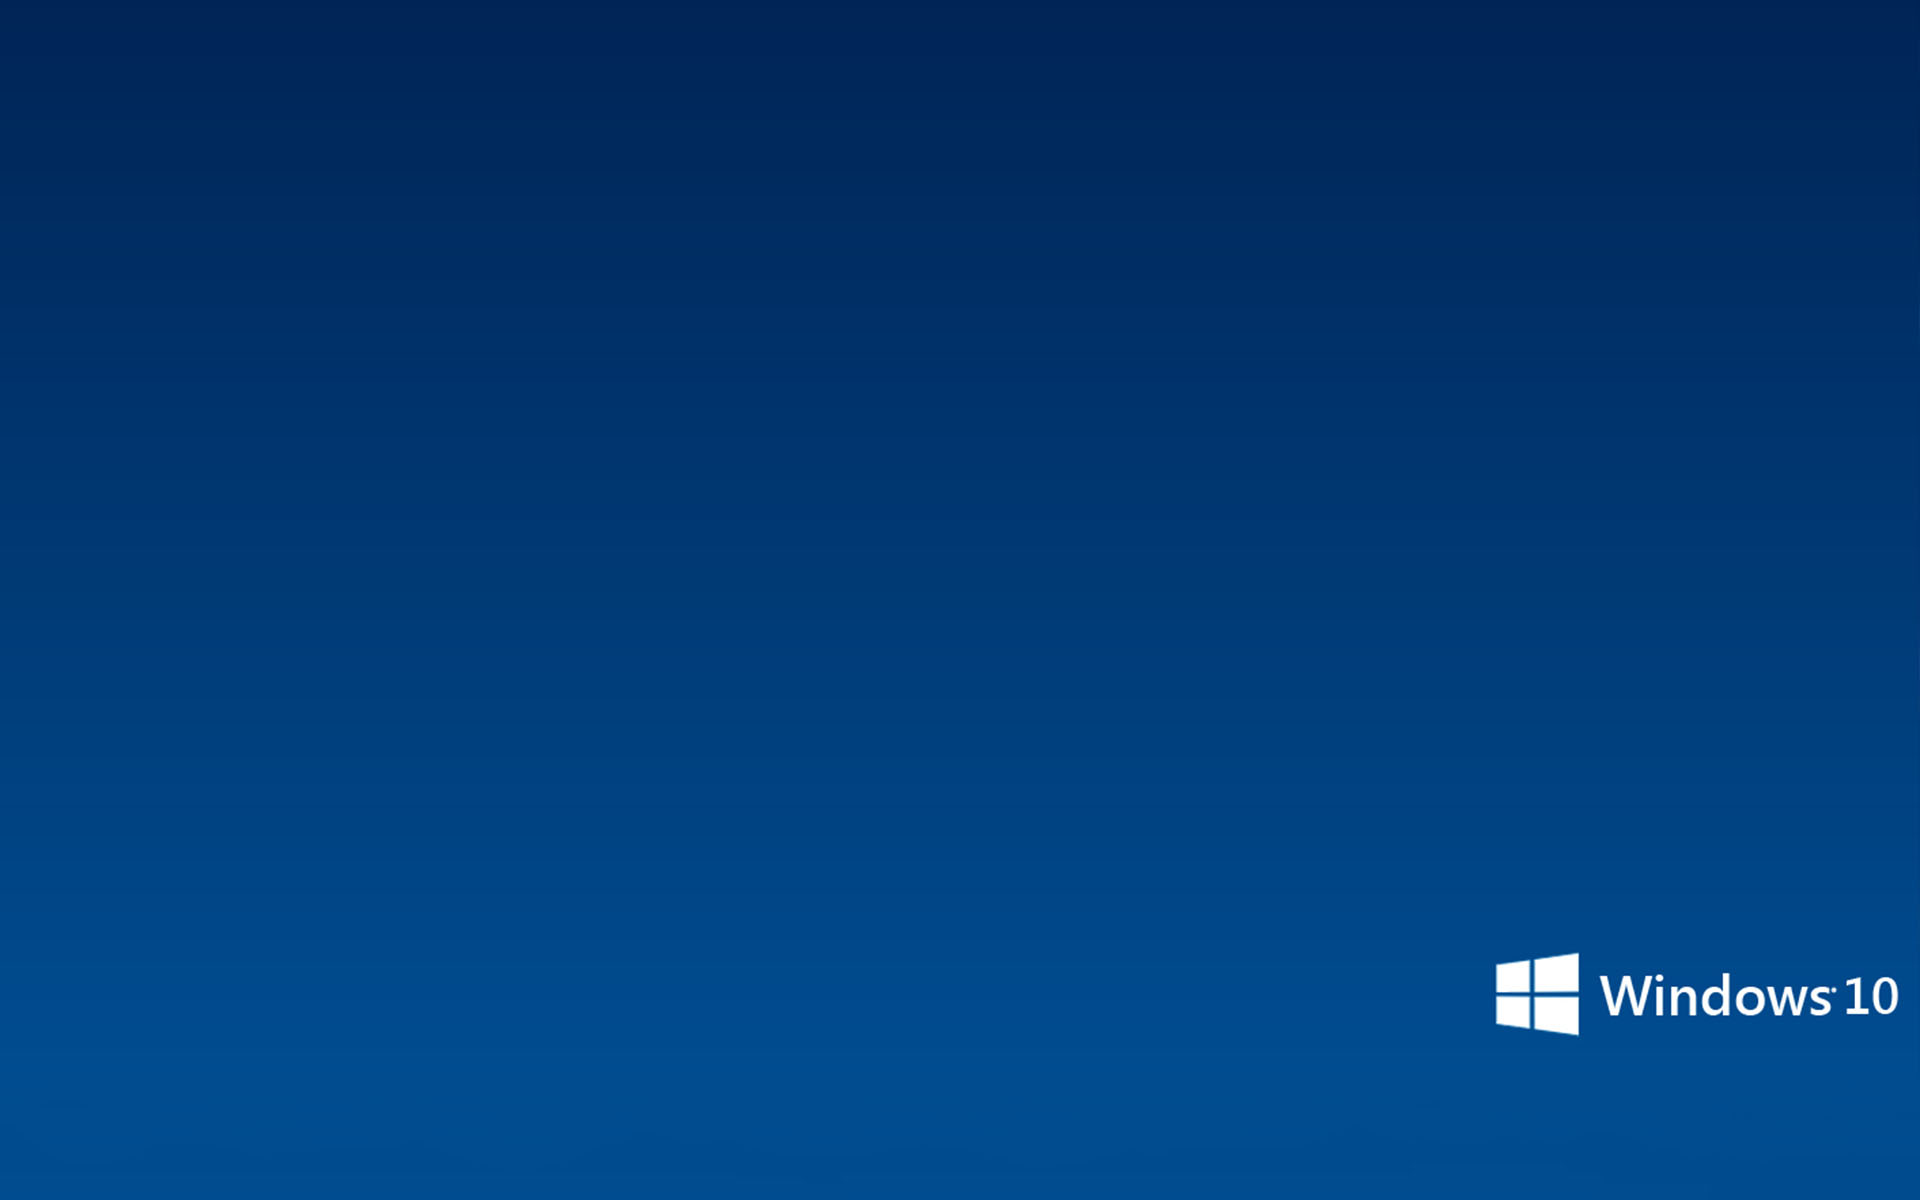 Free Download Simple Microsoft Windows 10 Wallpaper Wallpapers 1920x1200 For Your Desktop Mobile Tablet Explore 46 Different Wallpaper Windows 10 Desktops Windows 10 Virtual Desktop Wallpaper Windows 10 Two Different Wallpapers